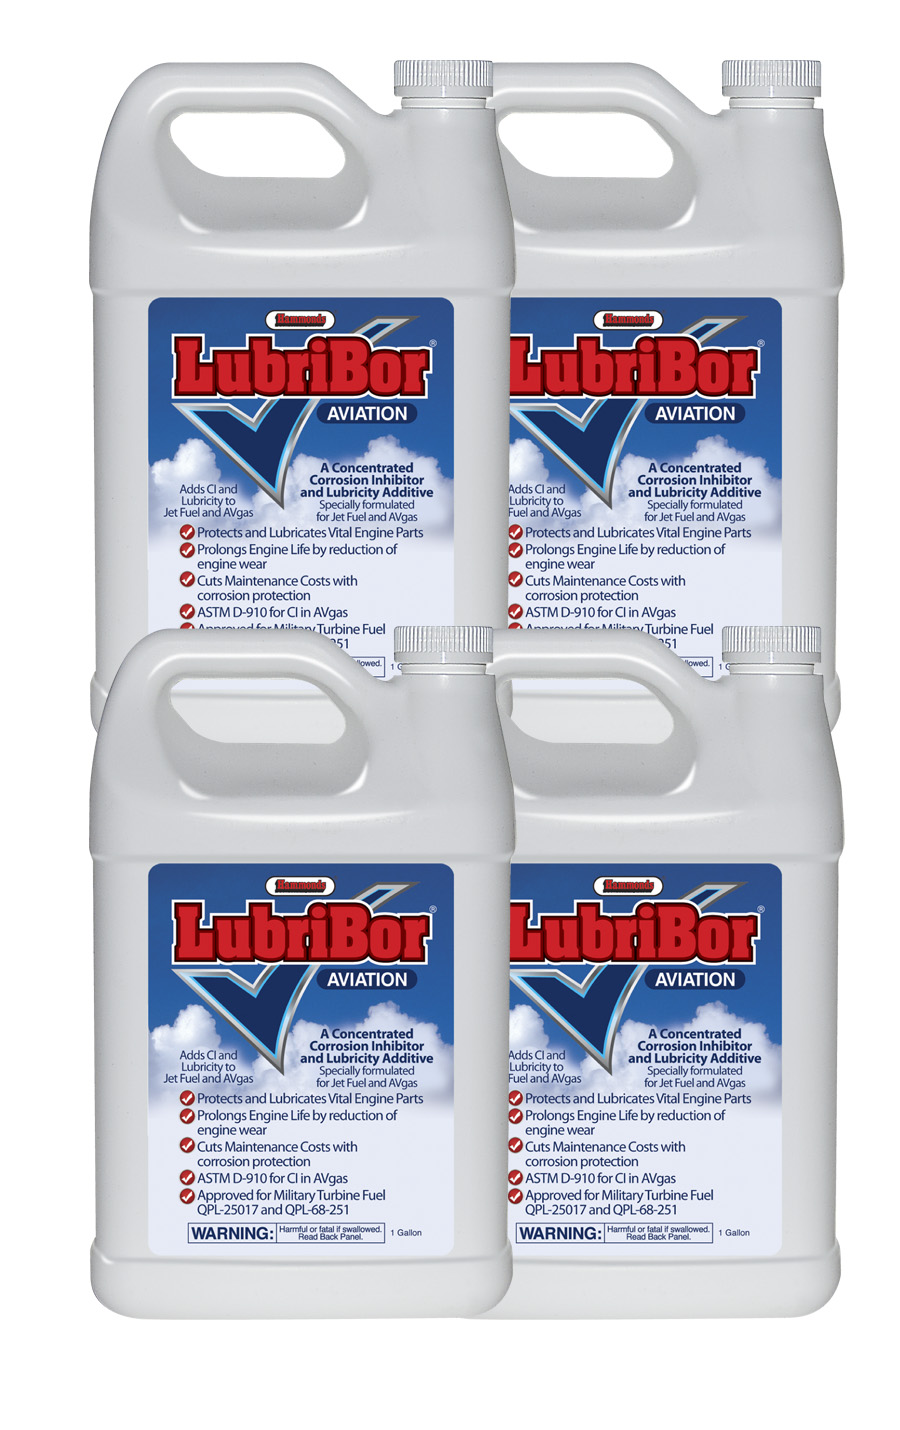 LubriBor 1 gal. (4 Pack) - Corrosion Inhibitor and Lubricity Improver for Aviation